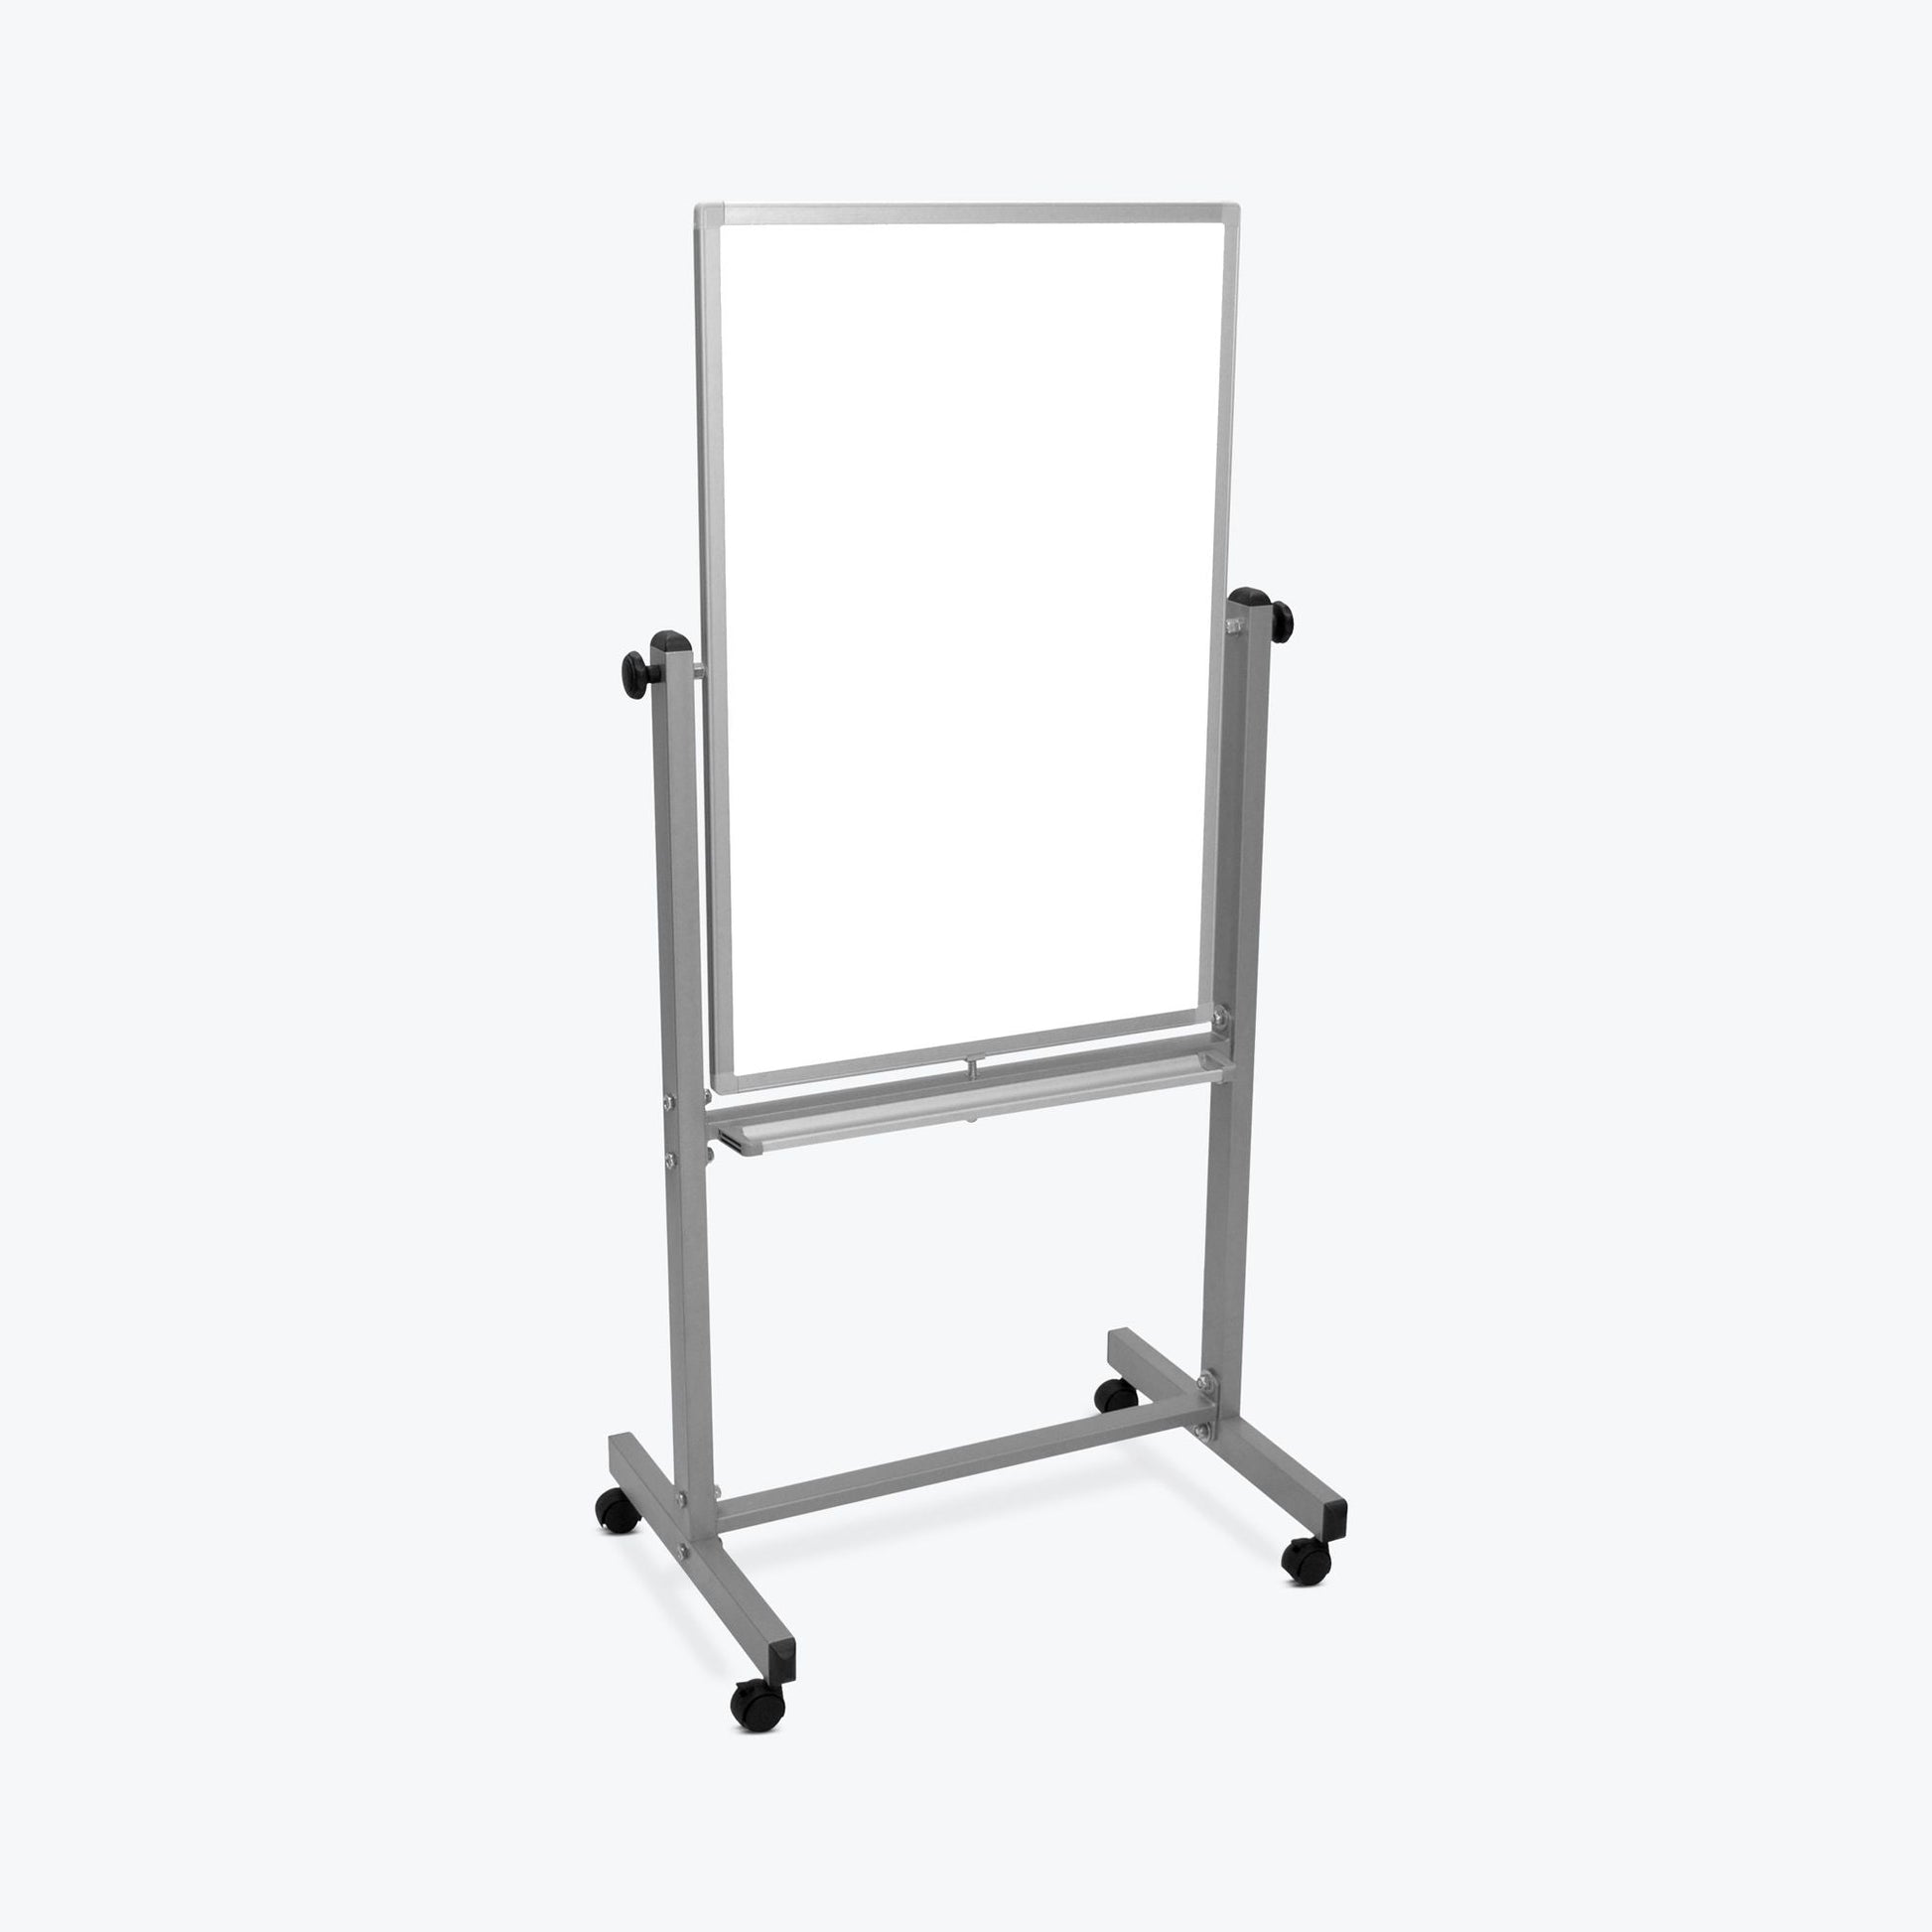 24"W x 36"H Mobile Whiteboard - Double-sided Magnetic dry erase markerboard - Luxor L270 - SchoolOutlet